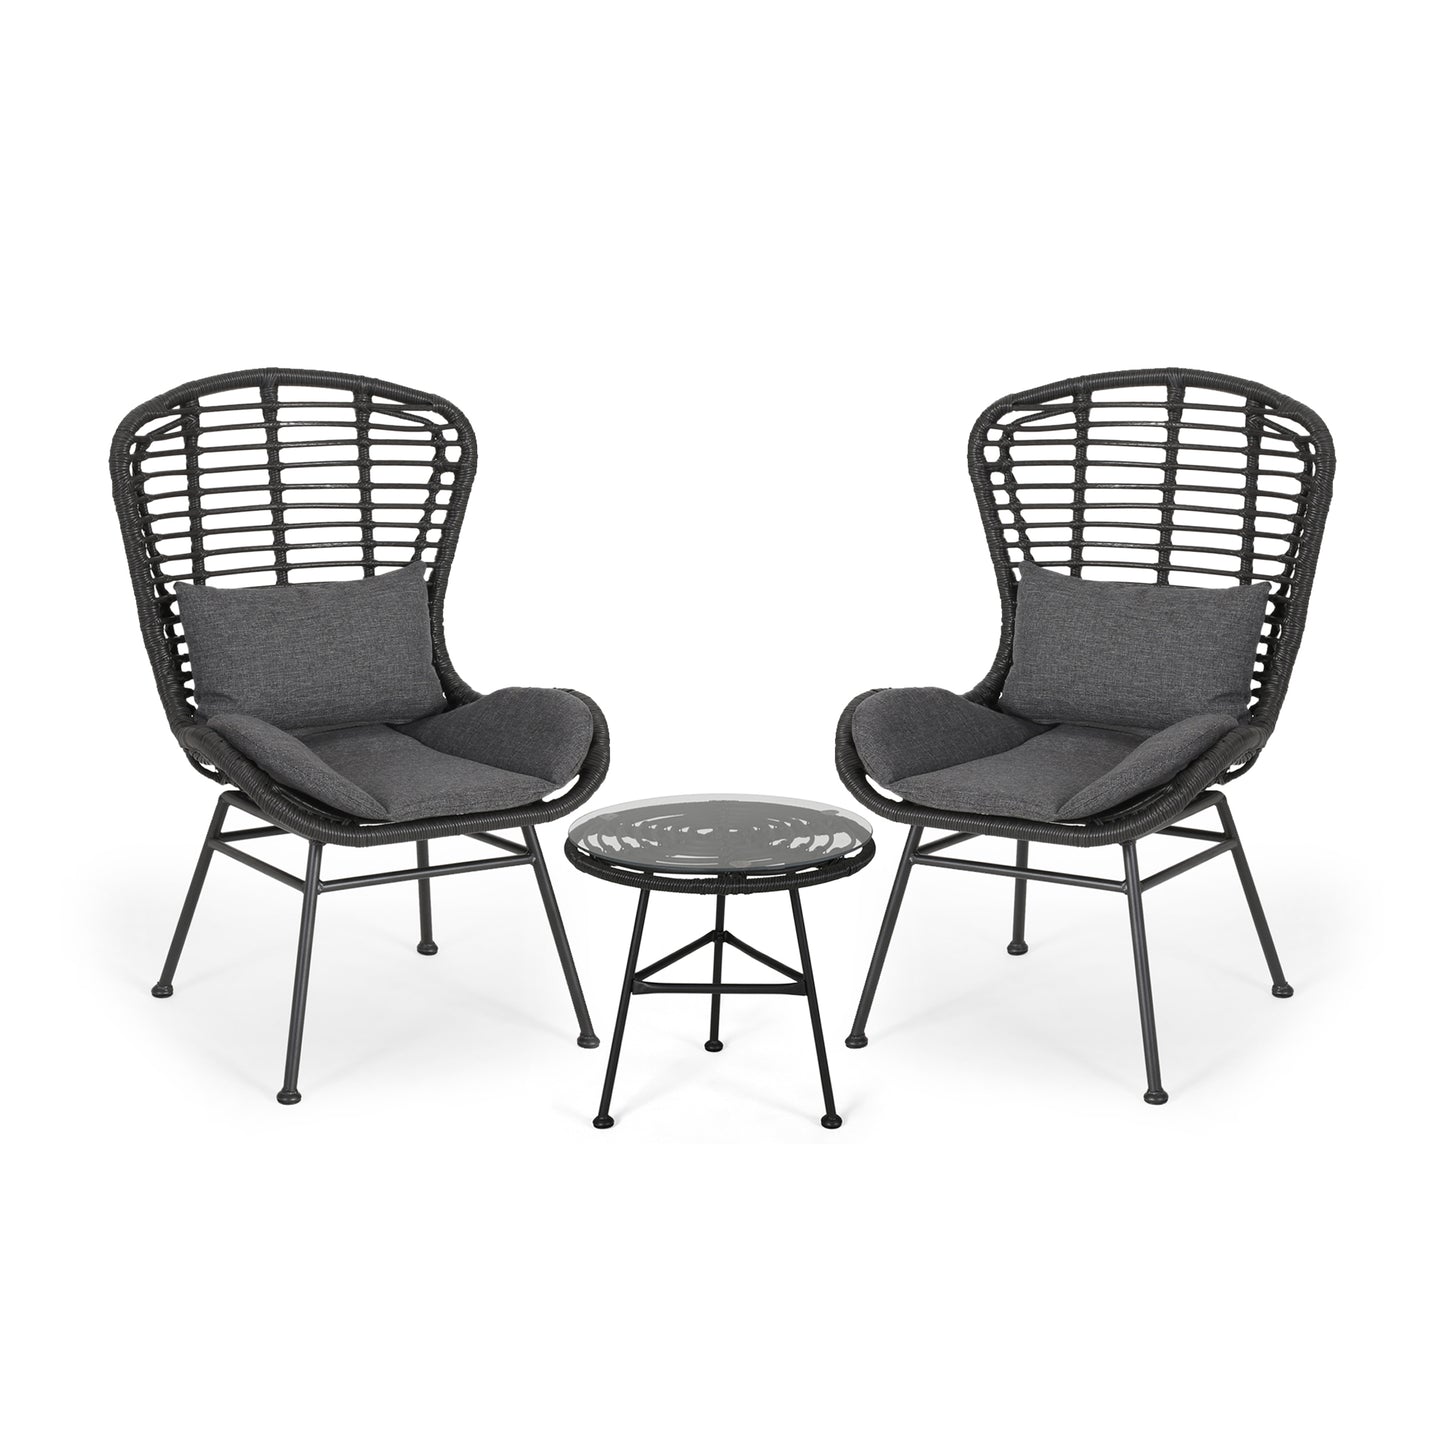 Bellagio Outdoor Modern Boho 2 Seater Wicker Chat Set with Side Table